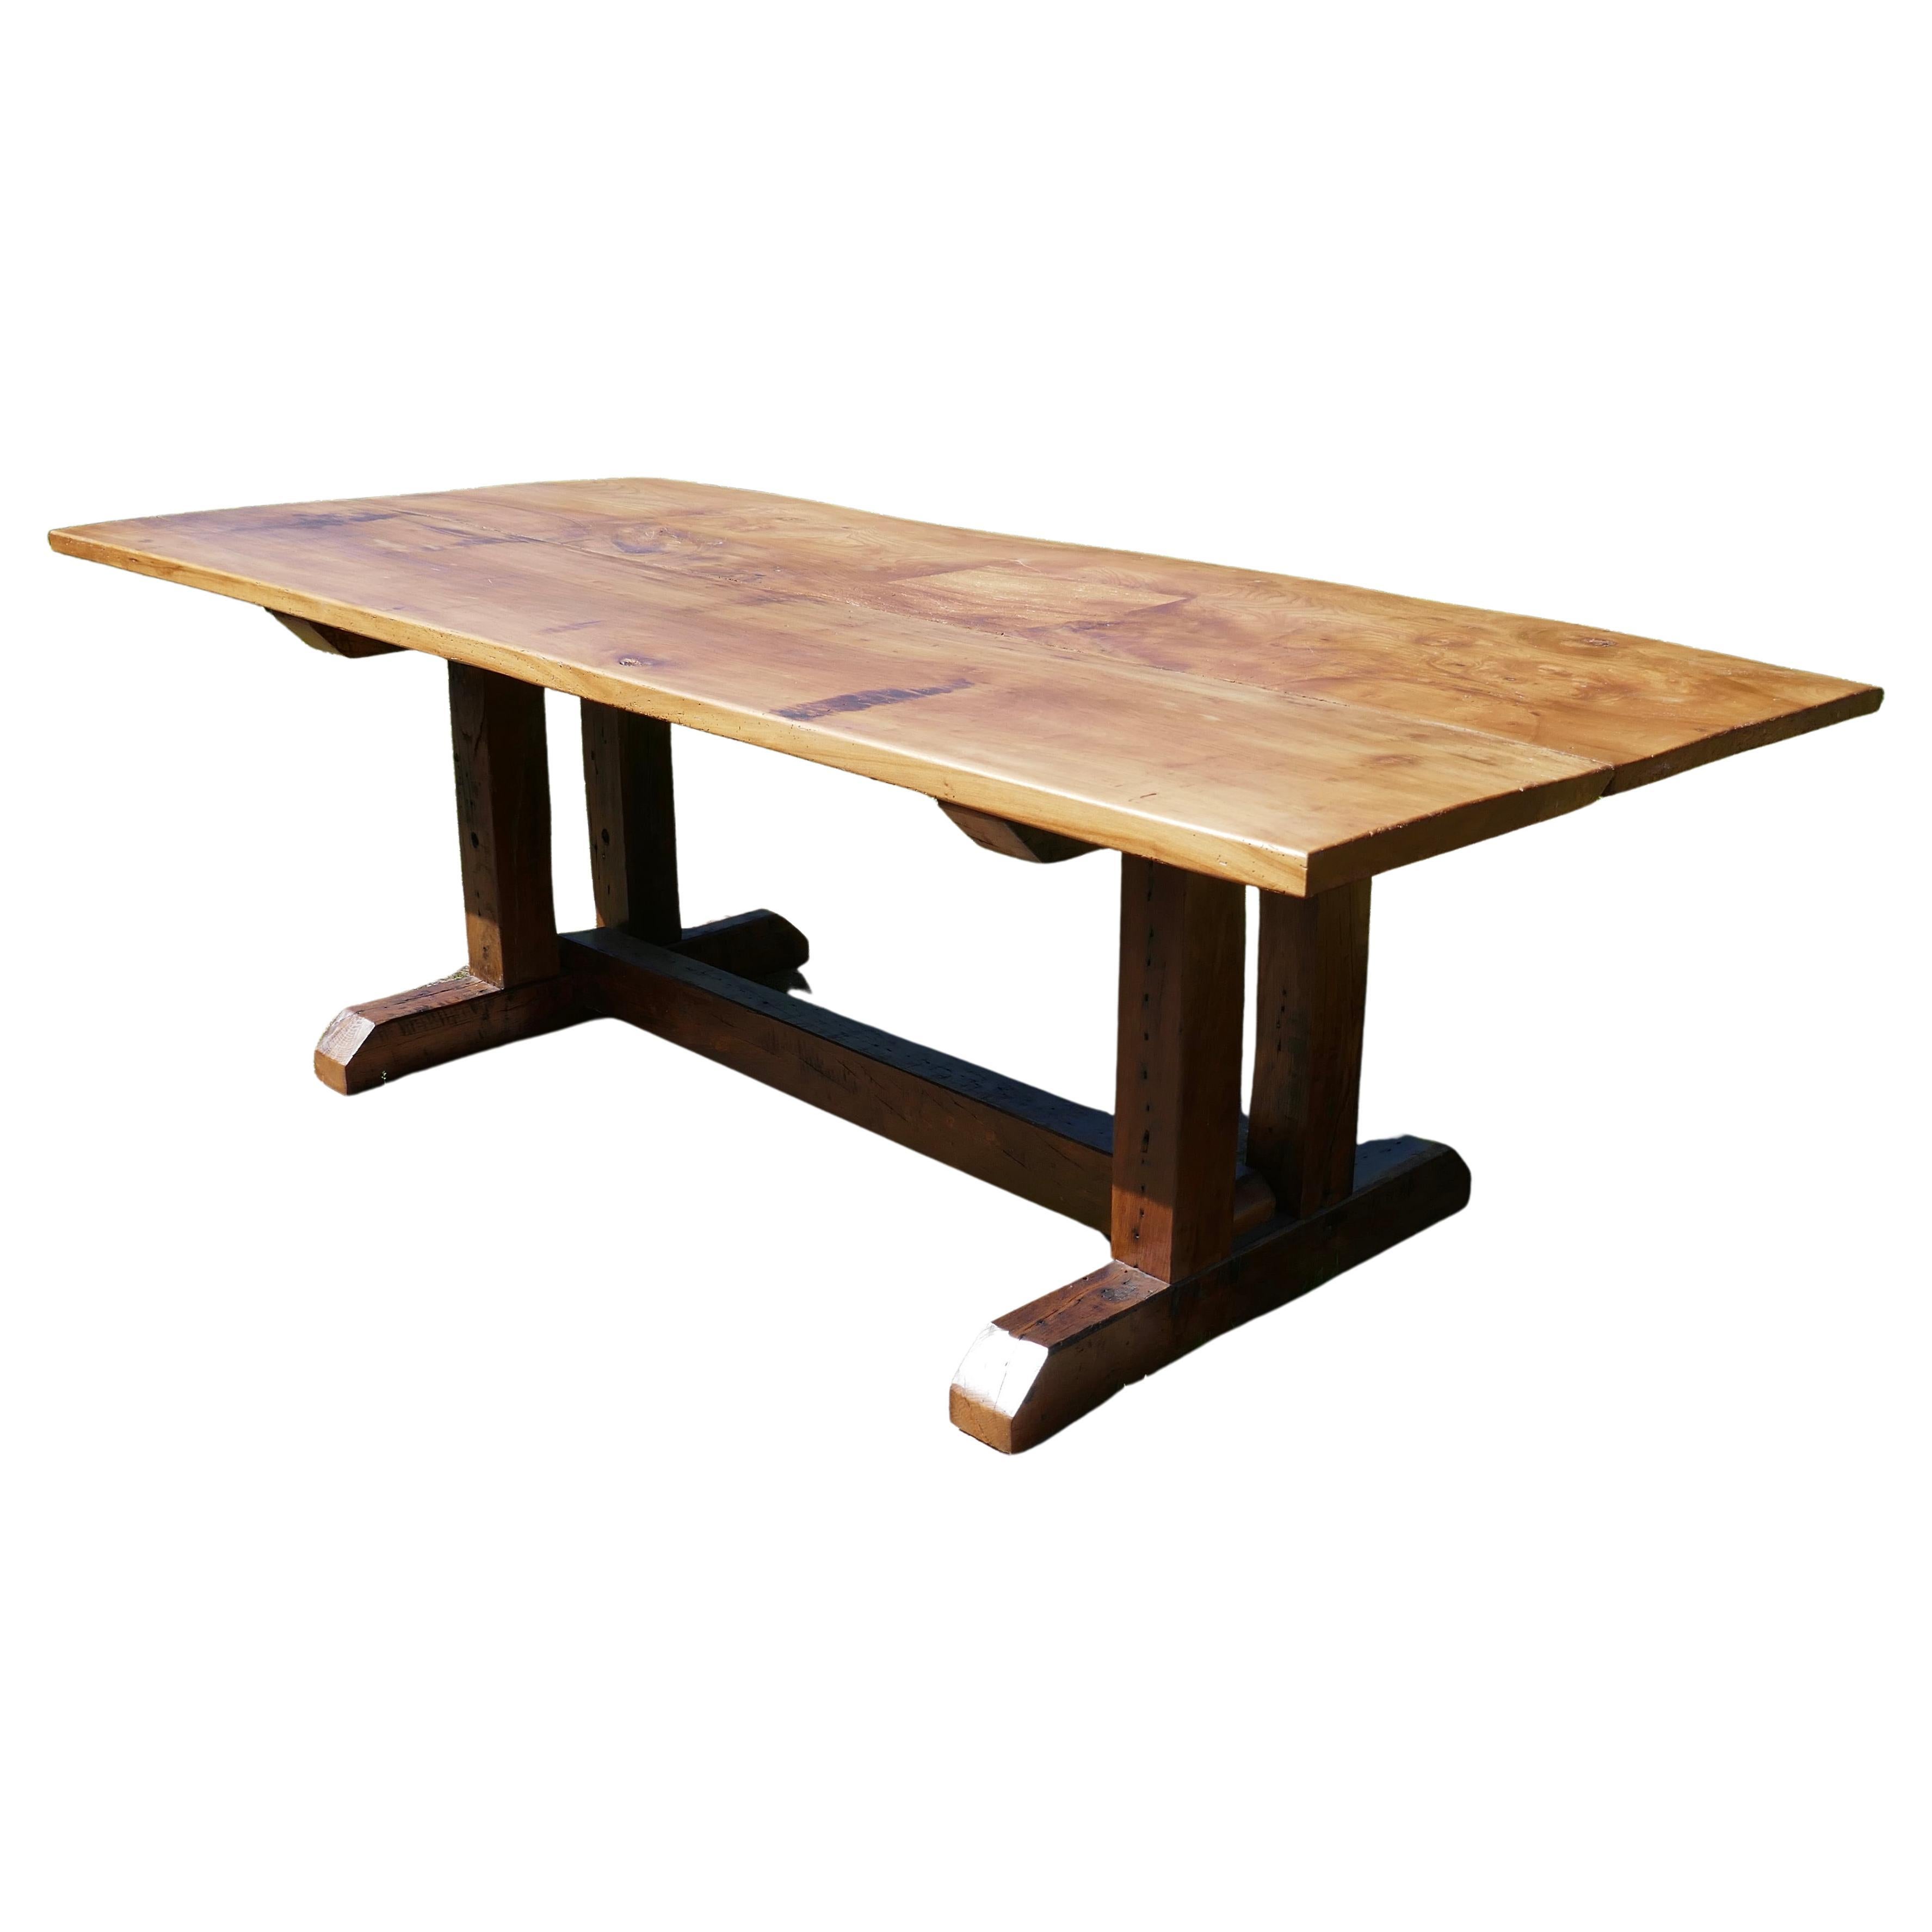 Reclaimed Elm Rustic English Barn Table    This is a superb piece 